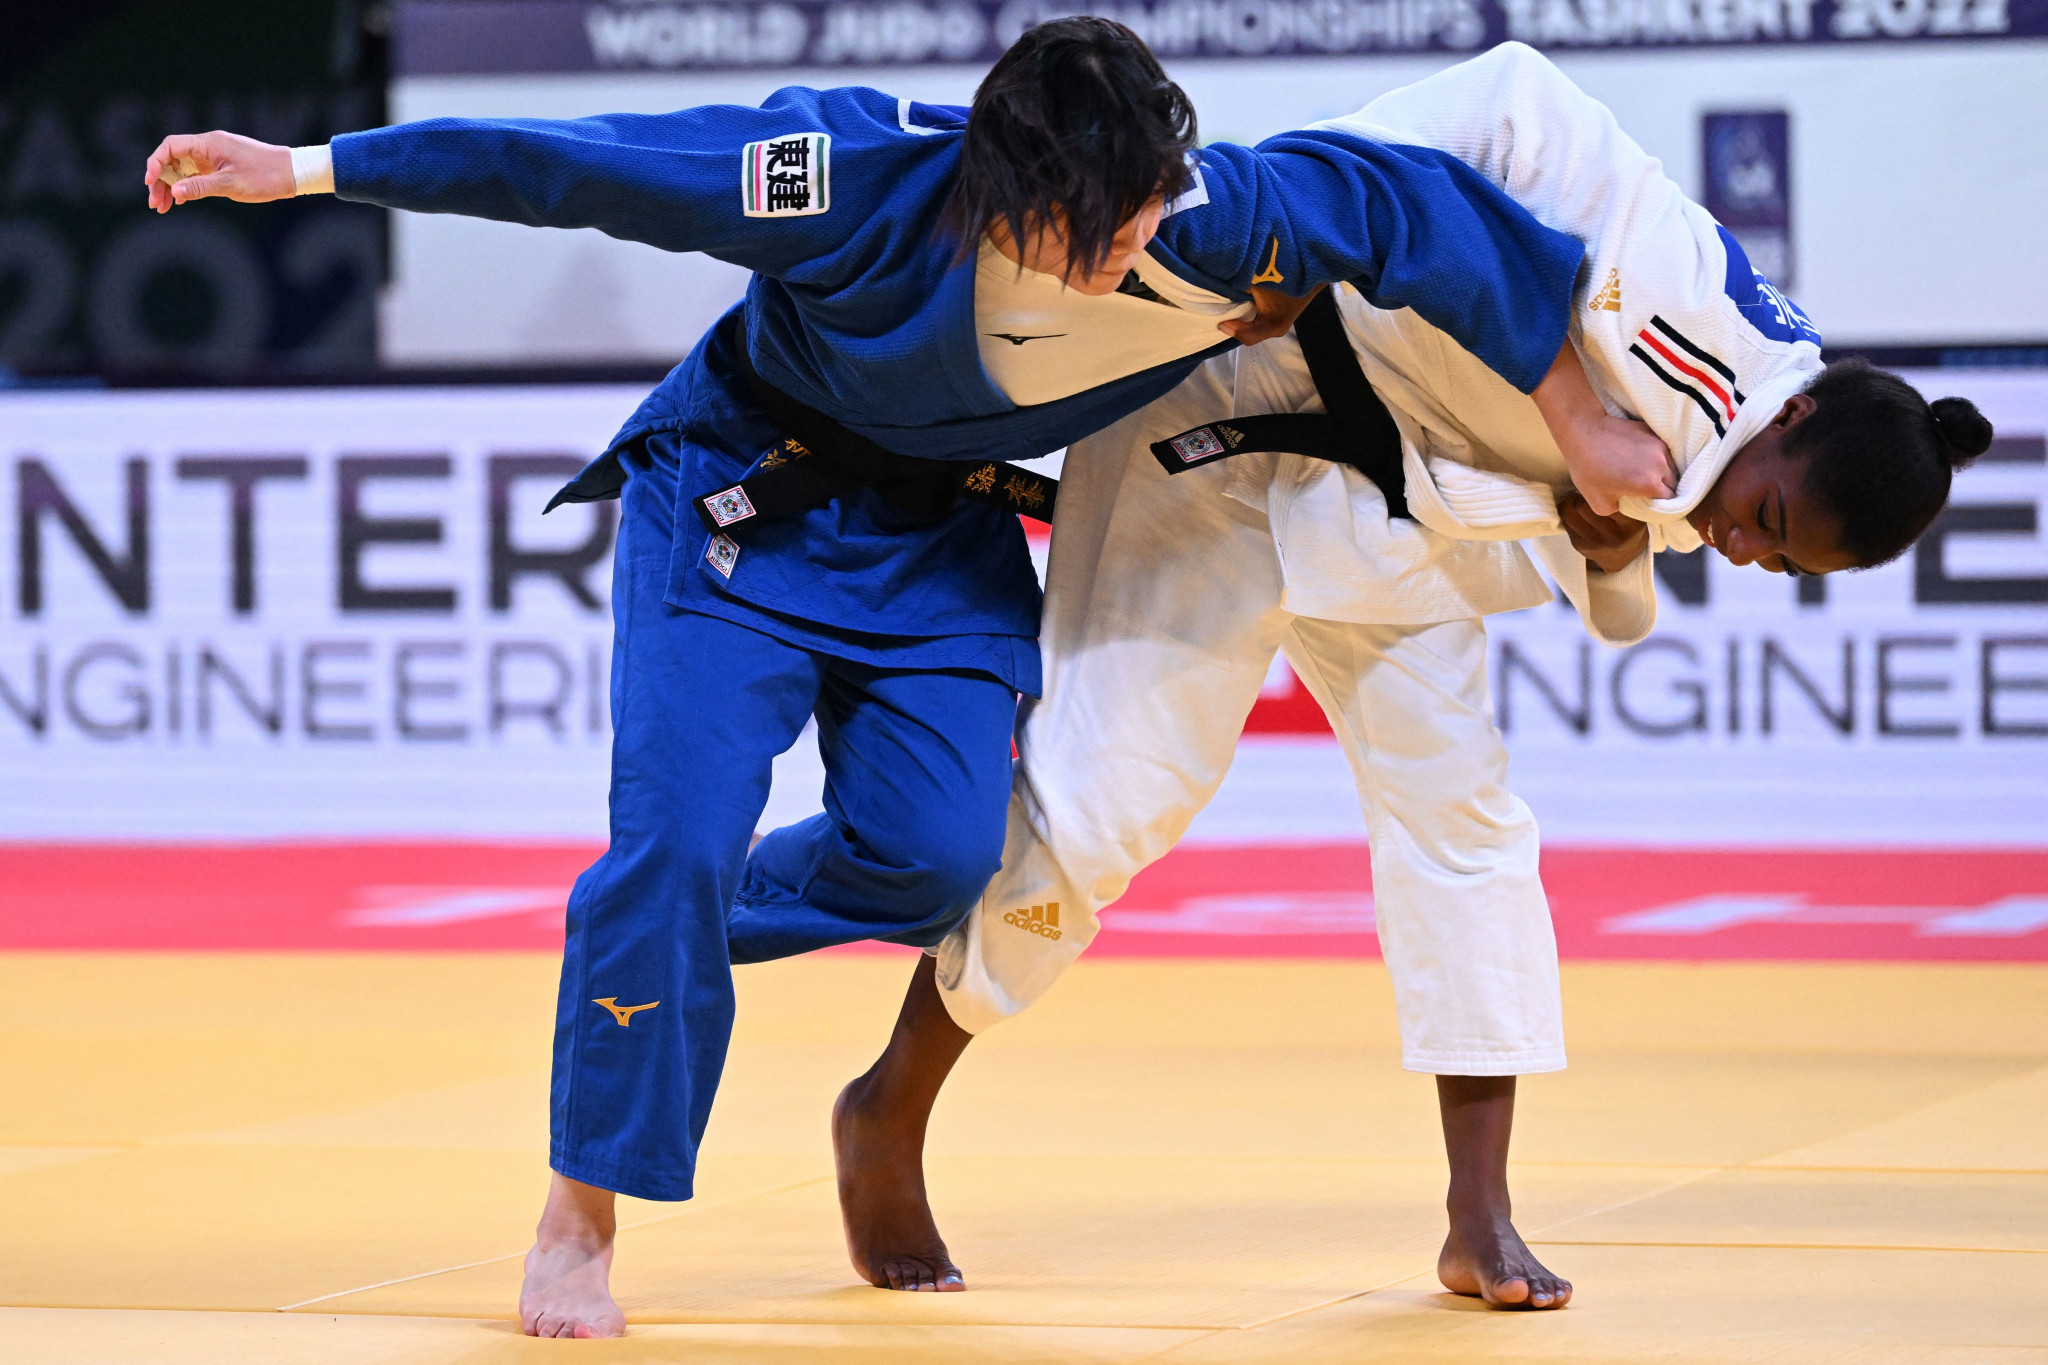 Saki Niizoe, left, won the crucial fourth bout with an ippon victory over Marie-Ève Gahié ©Getty Images